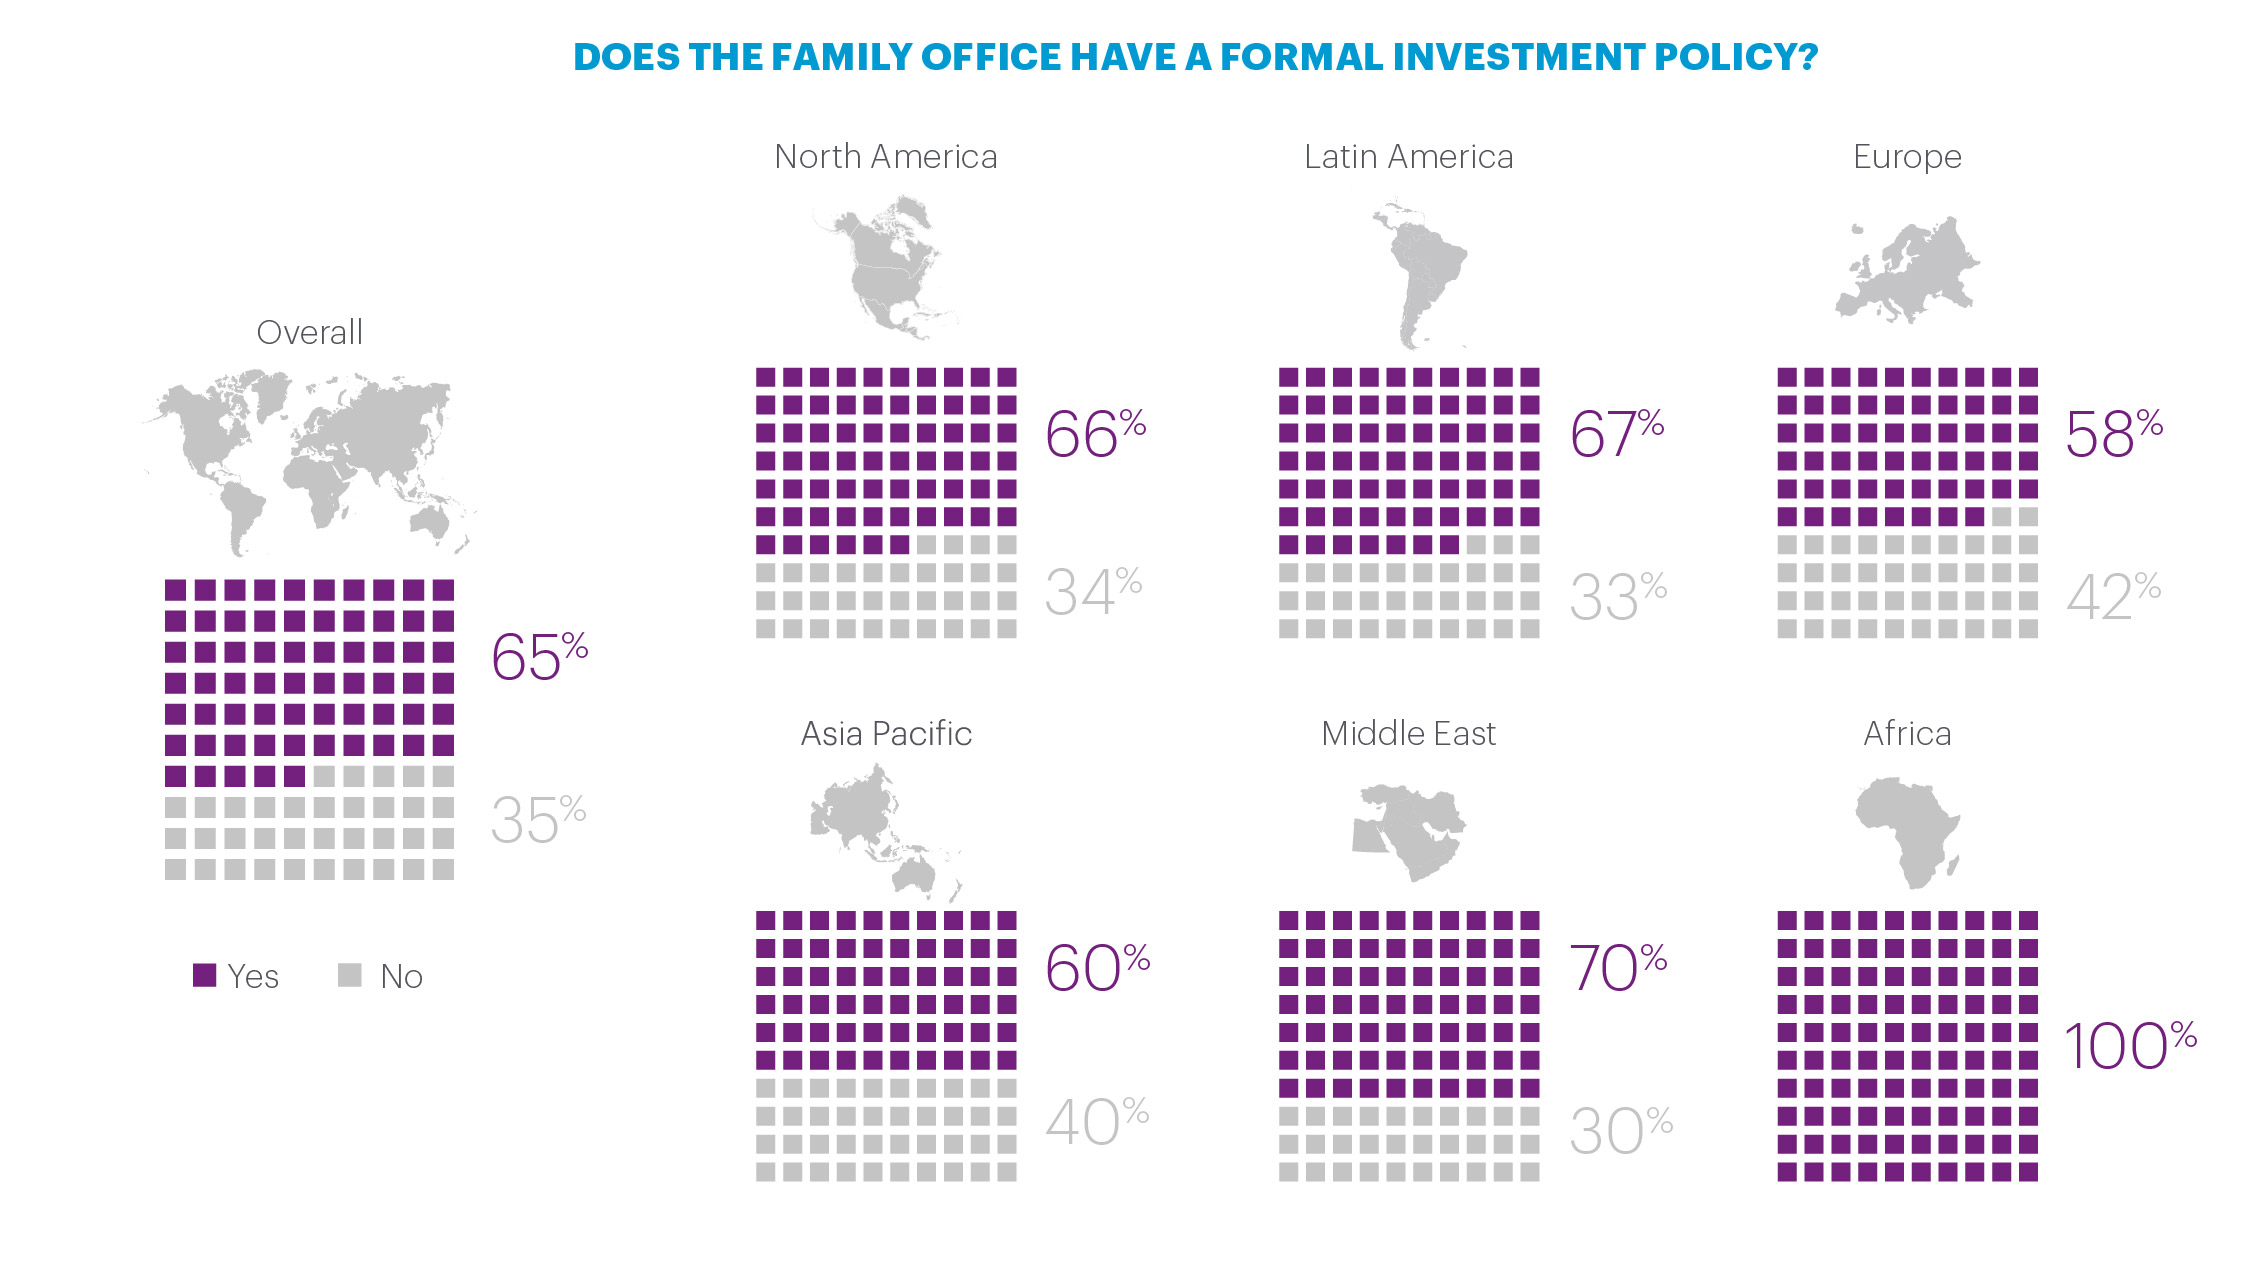 Regional percentages of FOs with formal investment policies